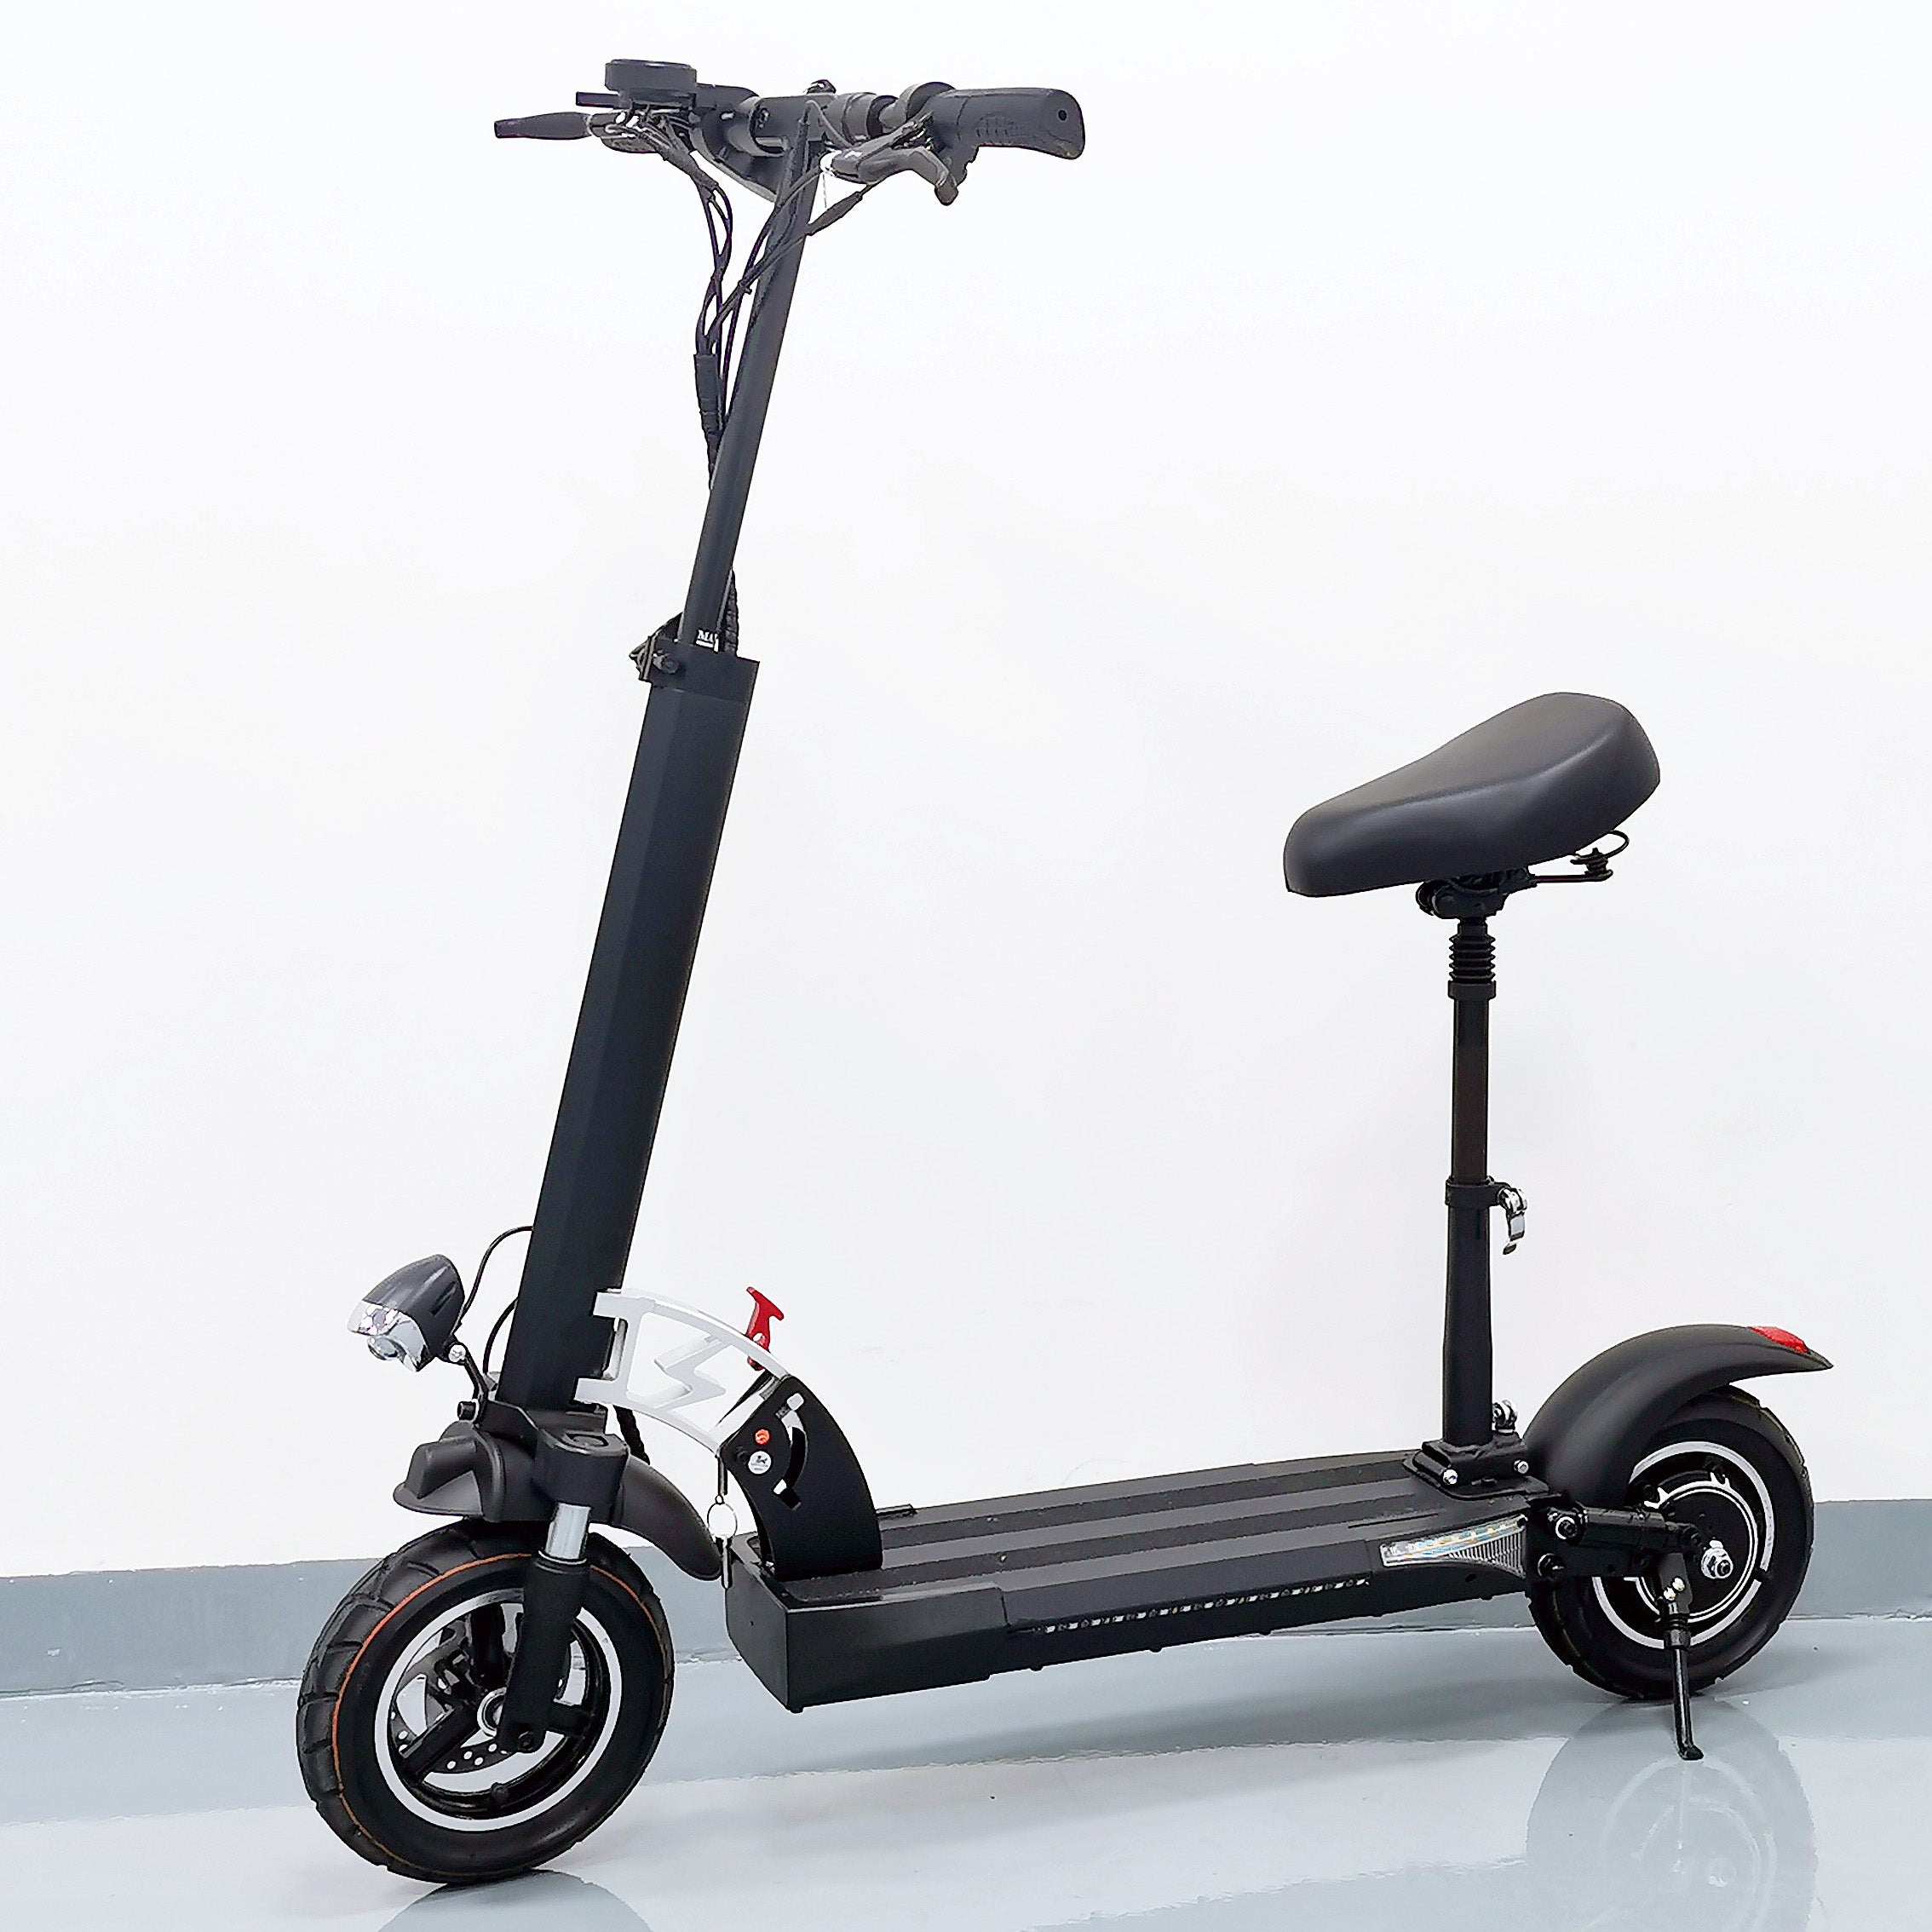 EU Warehouse 10inch HVD-3 48v 800w 15ah 45-50kmh Adult Electric Scooter